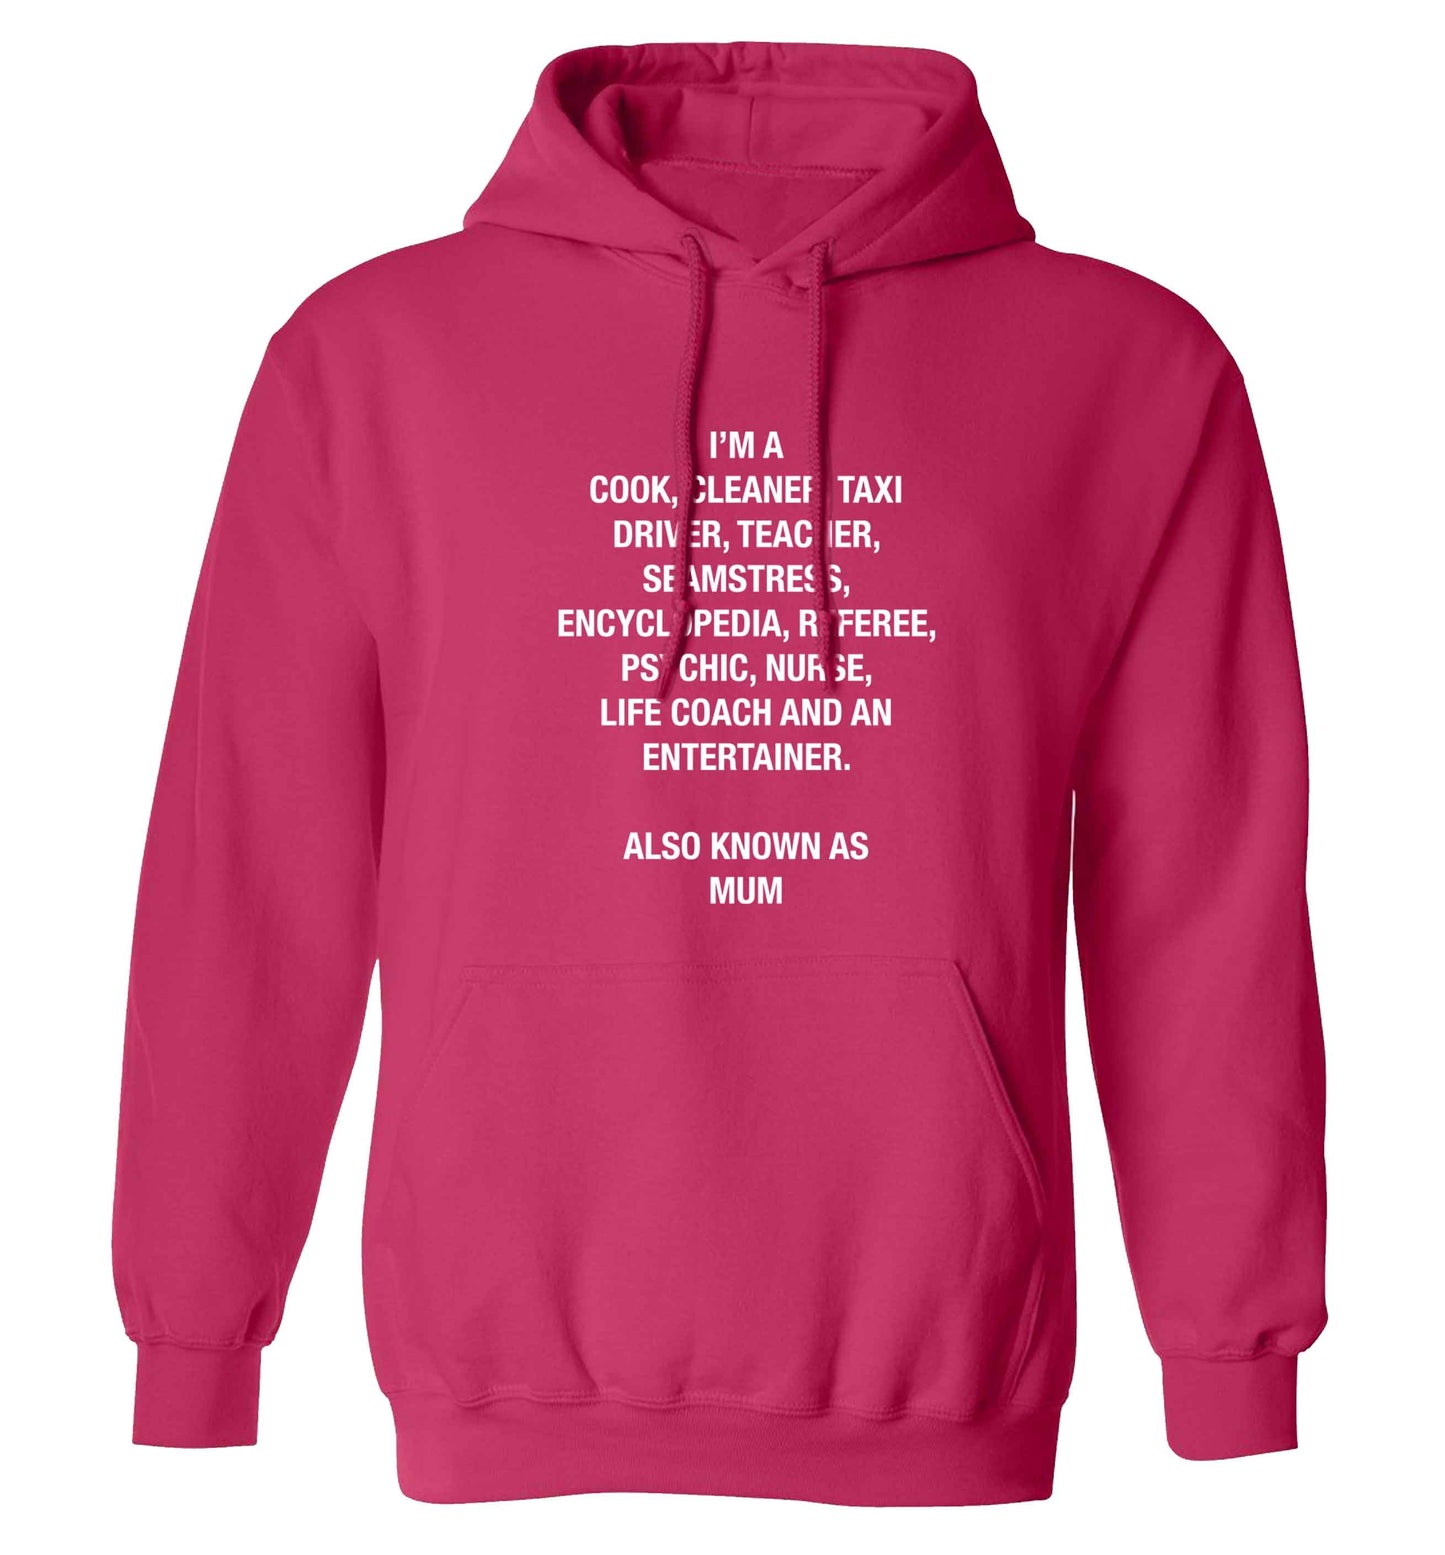 Funny gifts for your mum on mother's dayor her birthday! Mum, cook, cleaner, taxi driver, teacher, seamstress, encyclopedia, referee, psychic, nurse, life coach and entertainer adults unisex pink hoodie 2XL